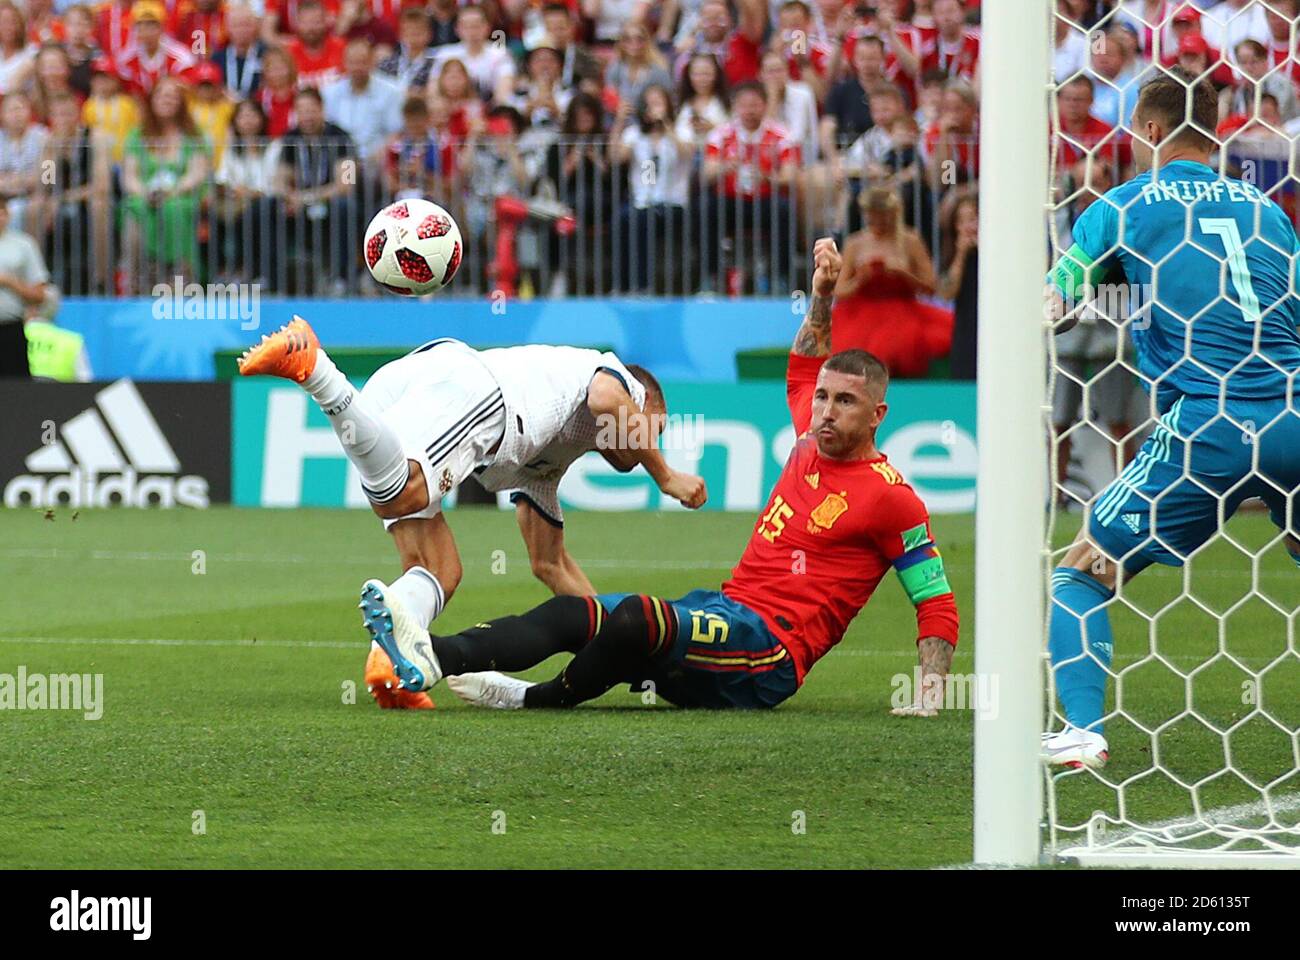 Russia's Sergei Ignashevich scores an own goal, Spain's first goal of the game,  Stock Photo